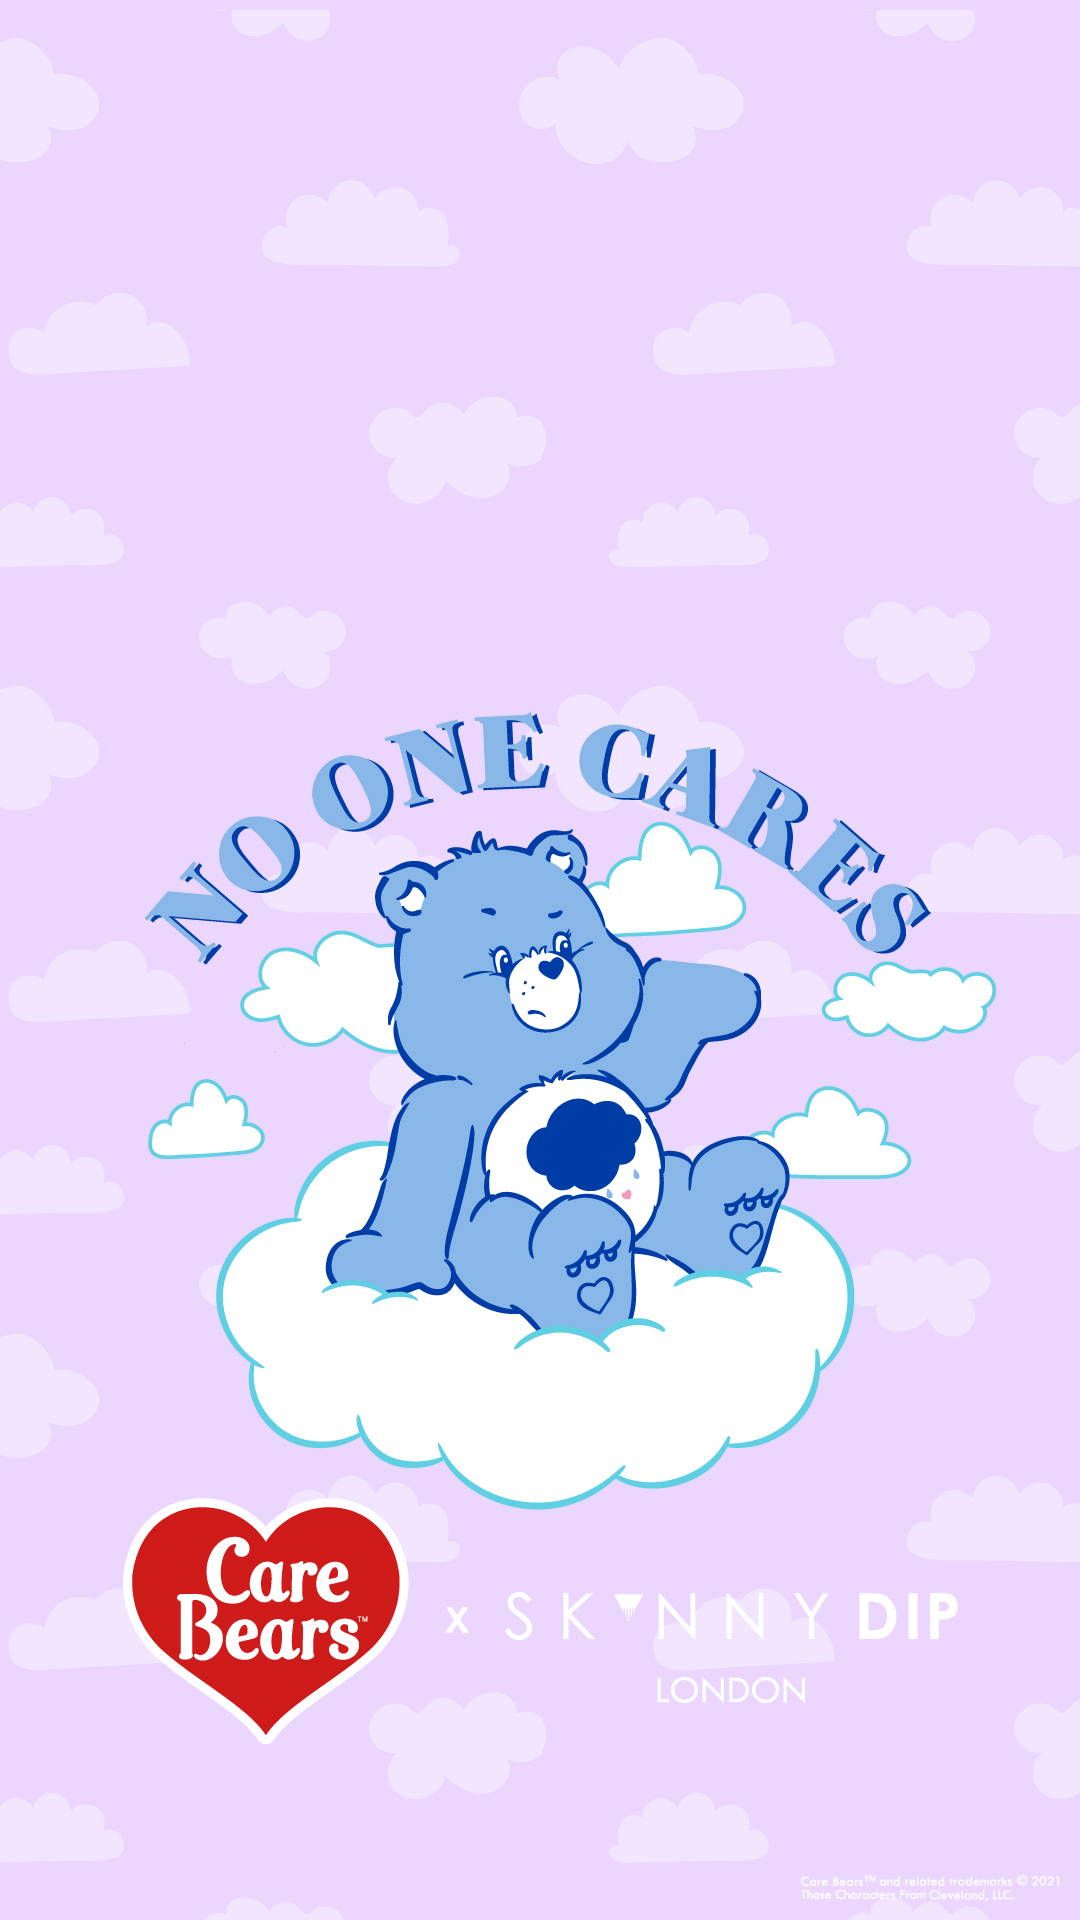 A blue teddy bear sitting on top of clouds - Care Bears